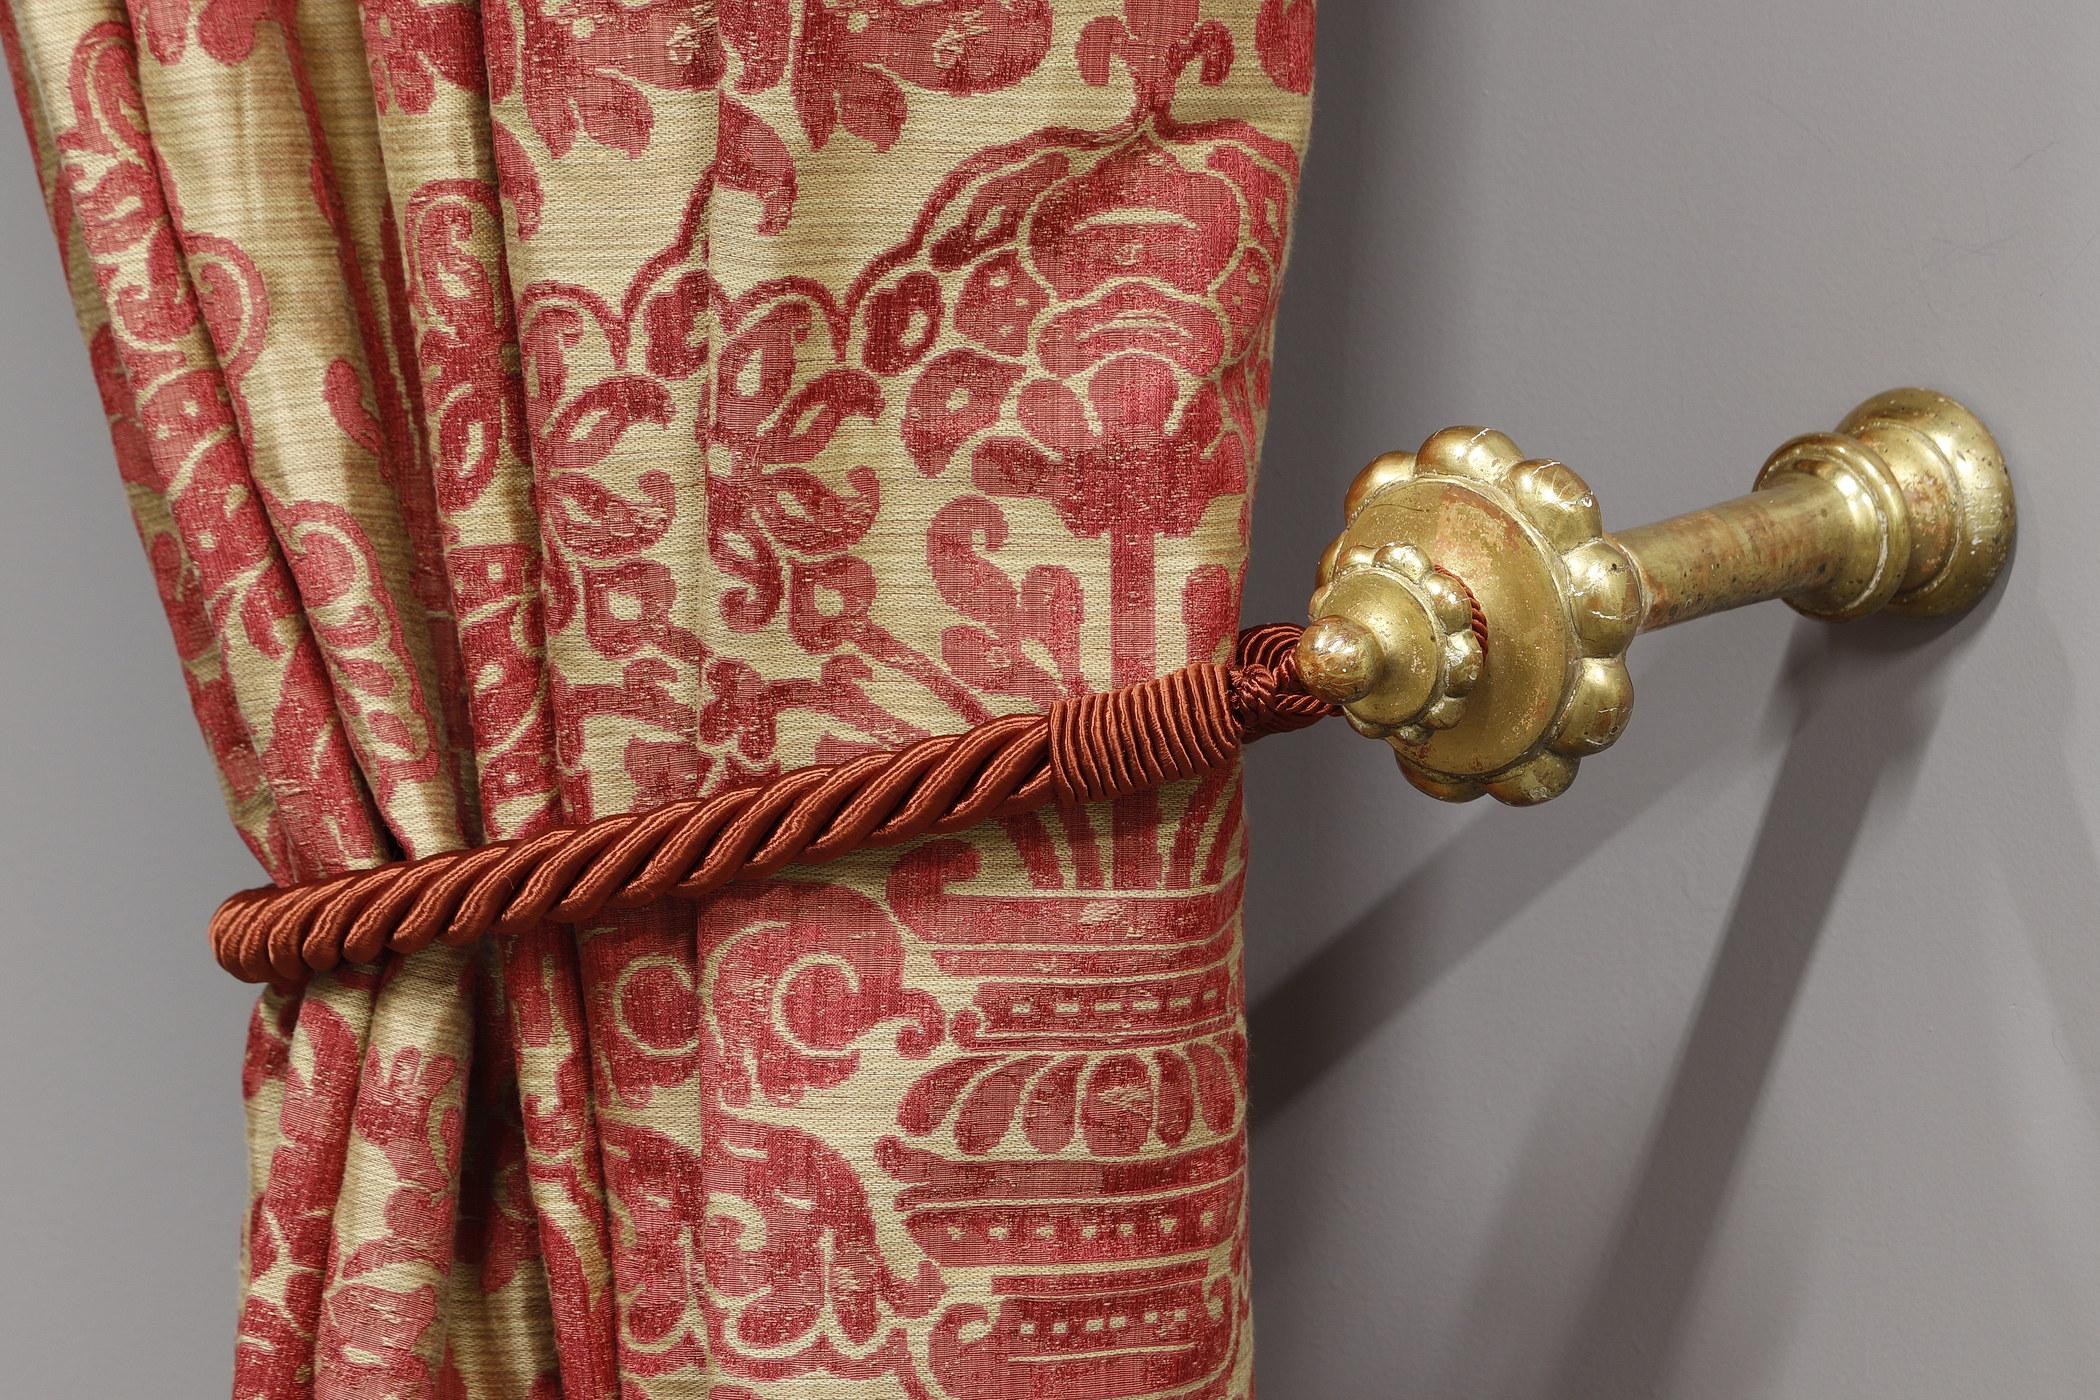 Two Pairs of Fadini-Borghi Curtains and Their Valances Topped by a Gilded Wood 7